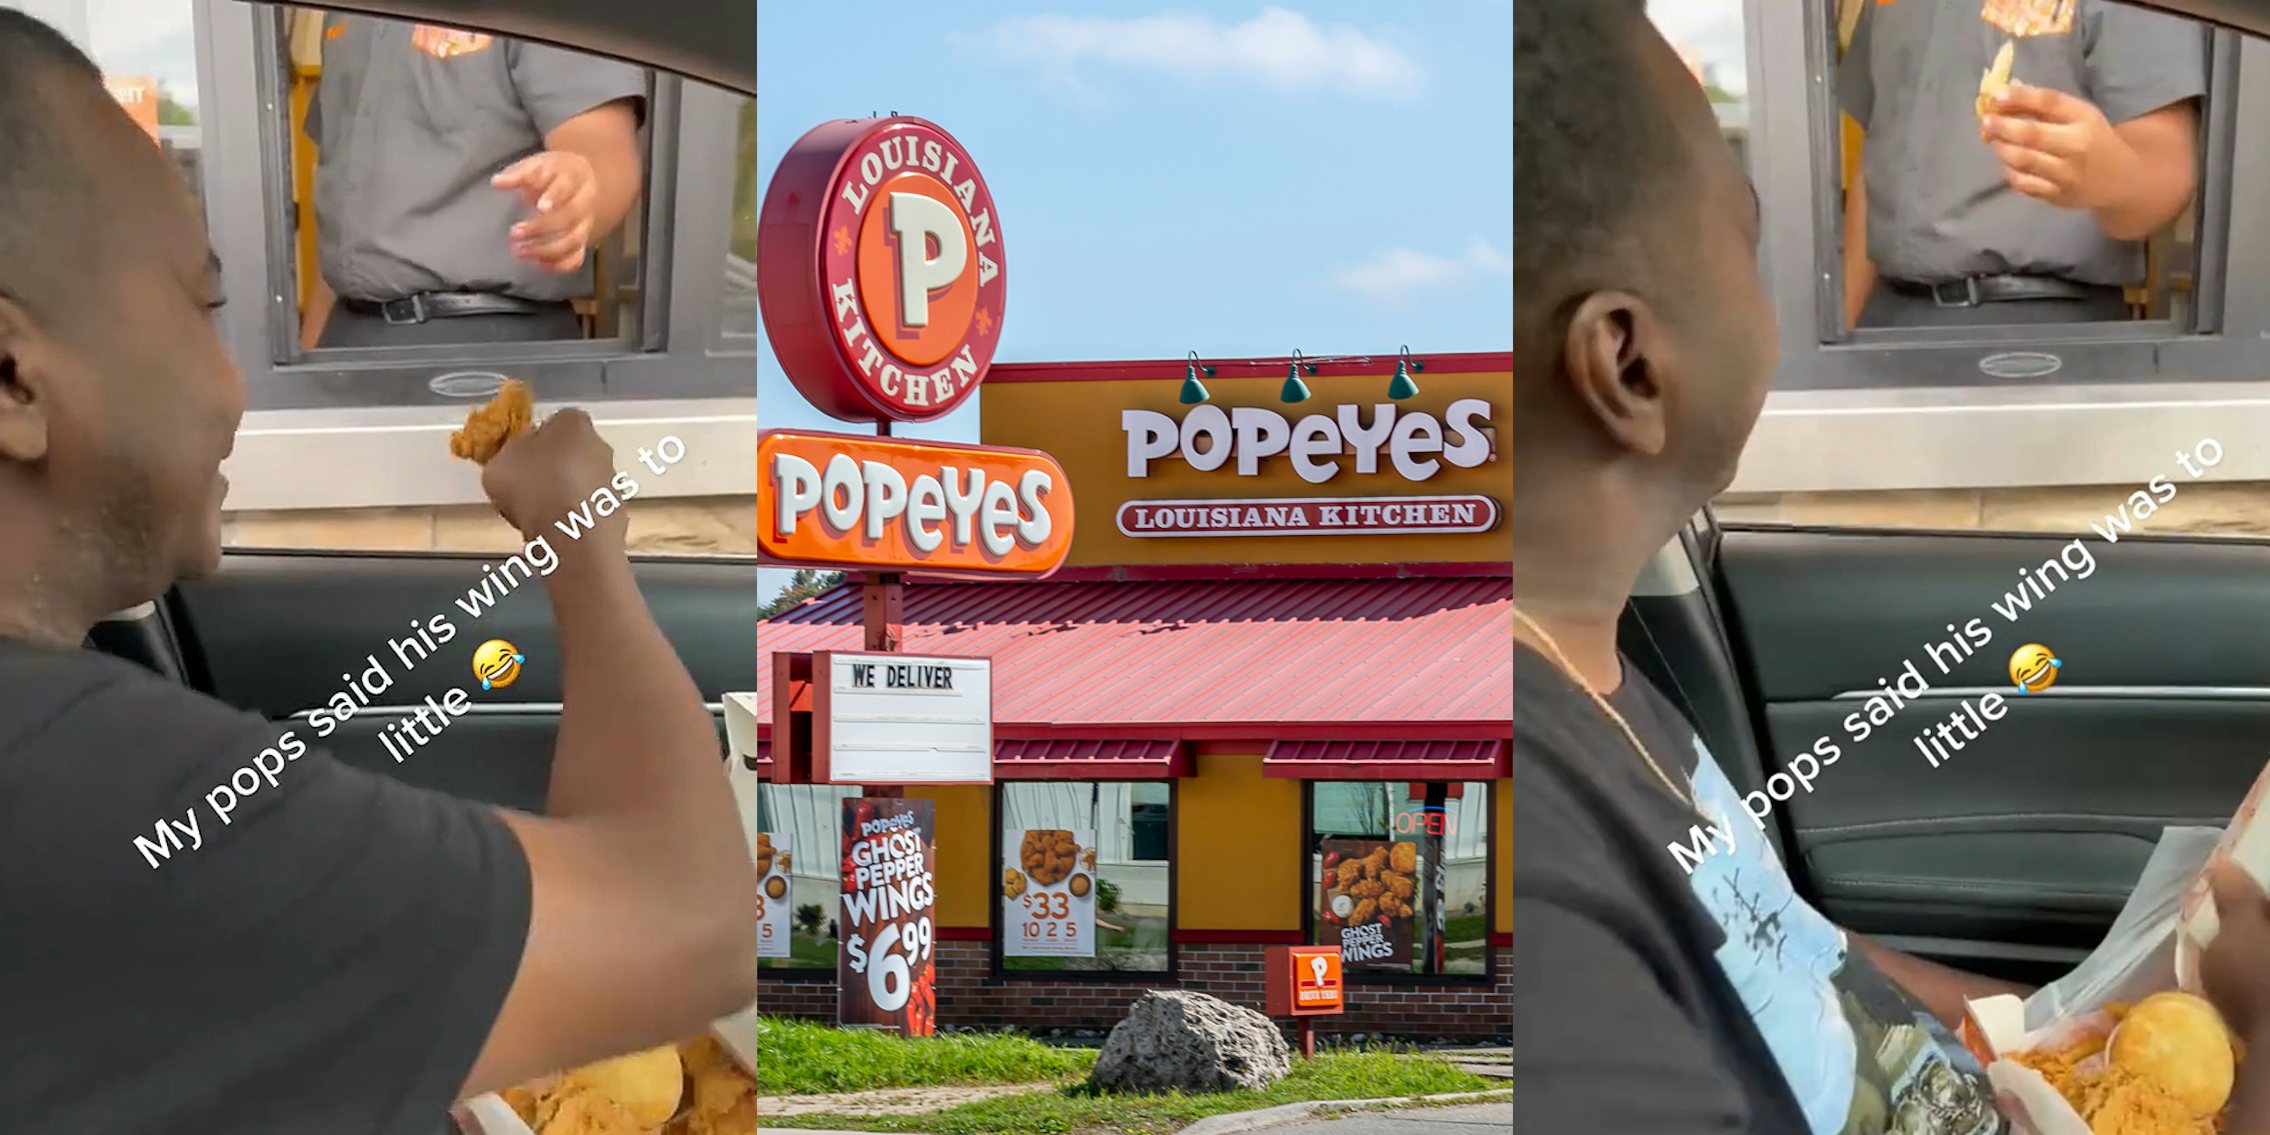 man at Popeye's drive thru window handing worker chicken wing caption 'My pops said his wing was to little' (l) Popeye's restaurant with sign (c) man at Popeye's drive thru window with worker holding chicken wing caption 'My pops said his wing was to little' (r)